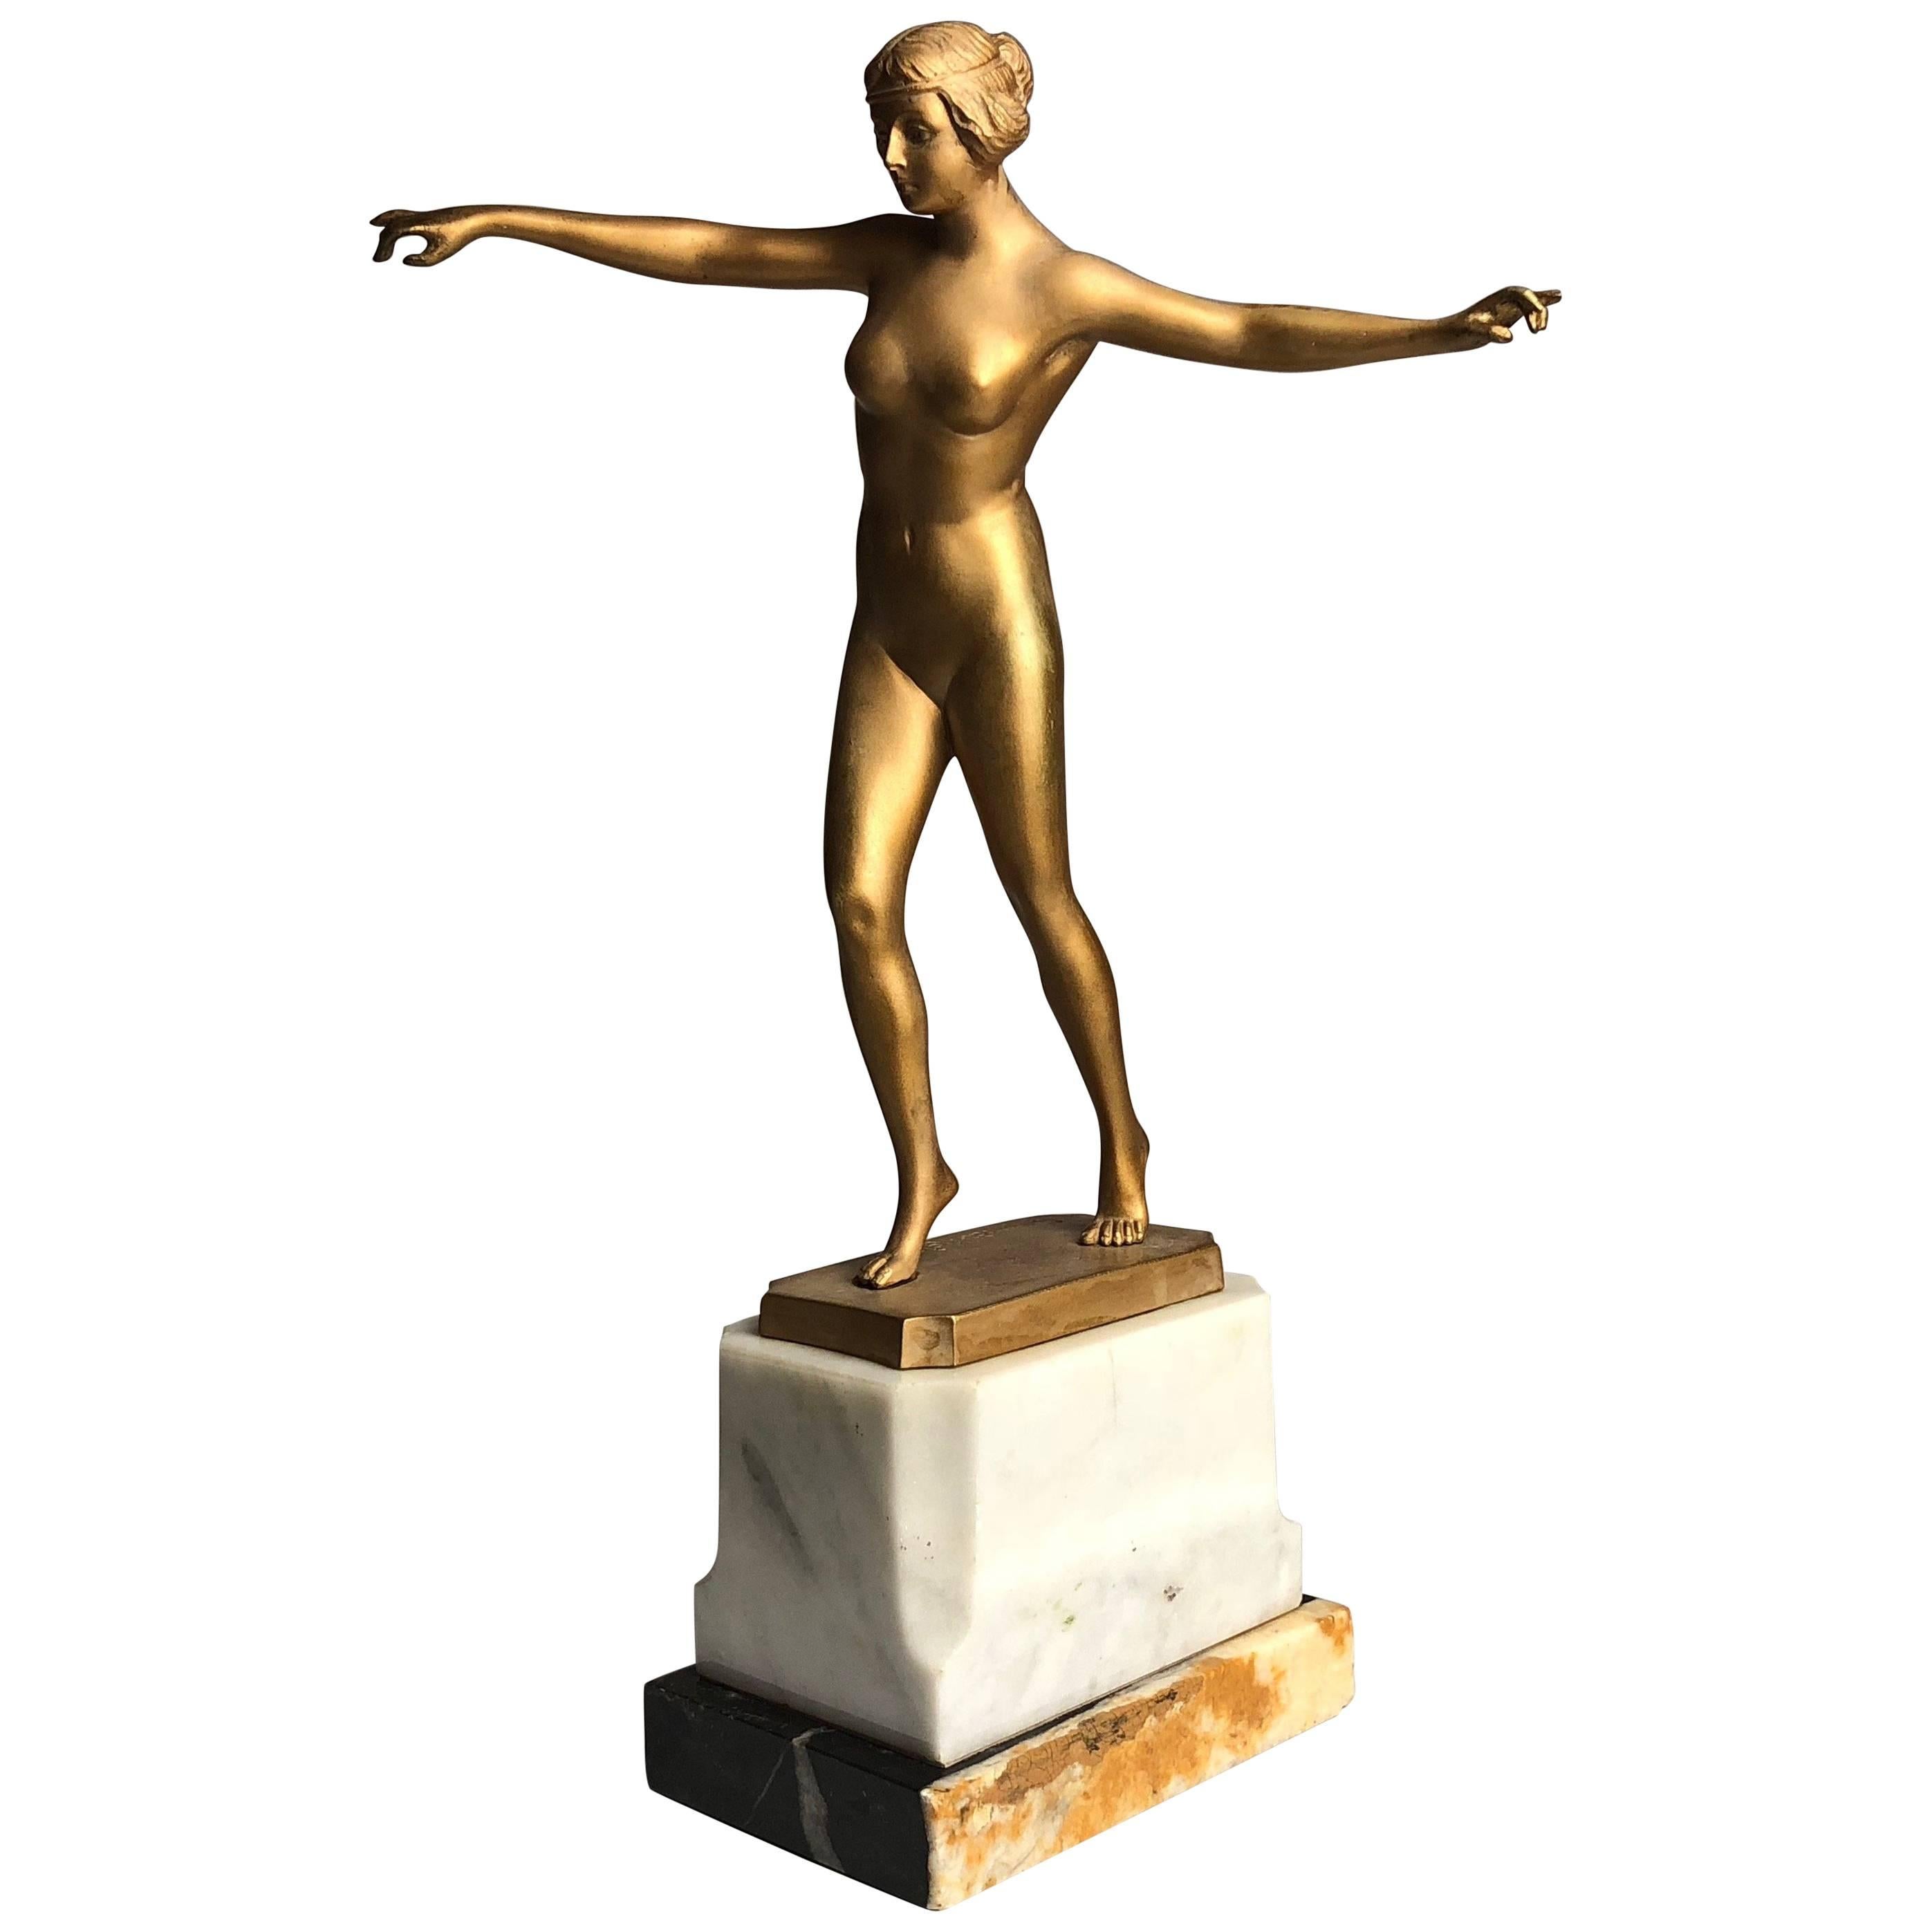 Early 20th Art Deco gilded bronze Sculpture of a Female Nude by Schmidt Hofer